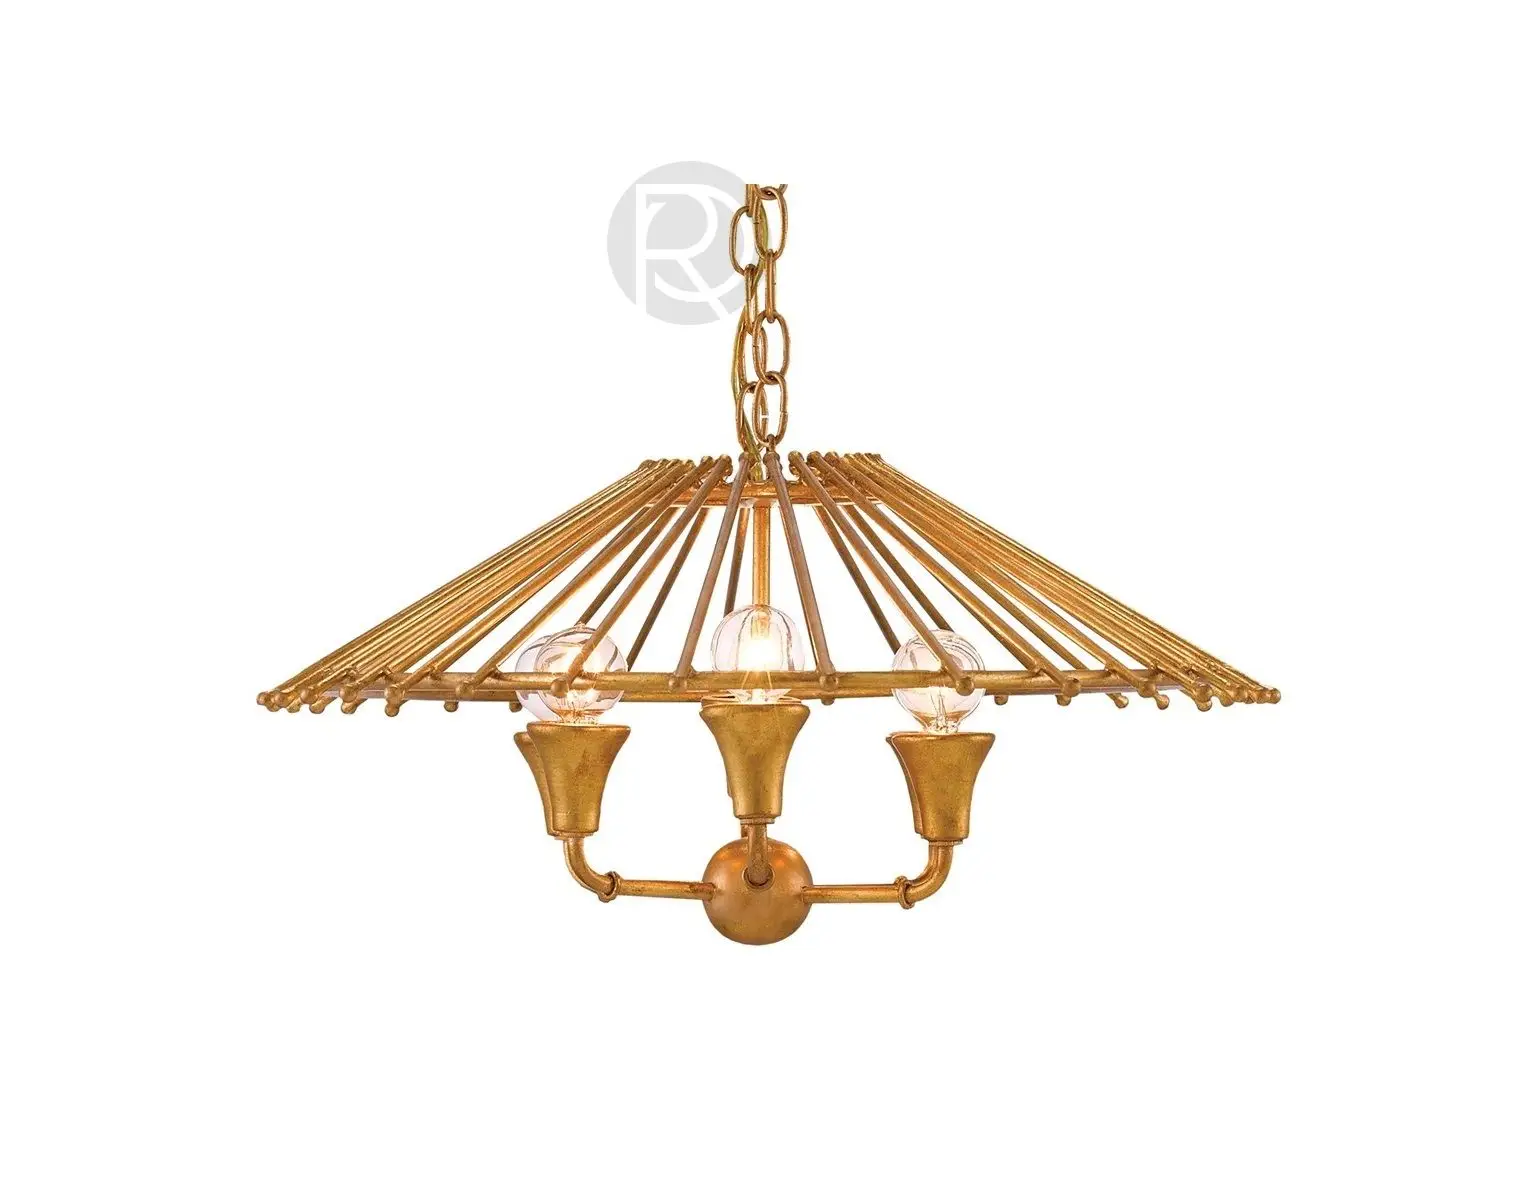 TEAHOUSE Chandelier by Currey & Company